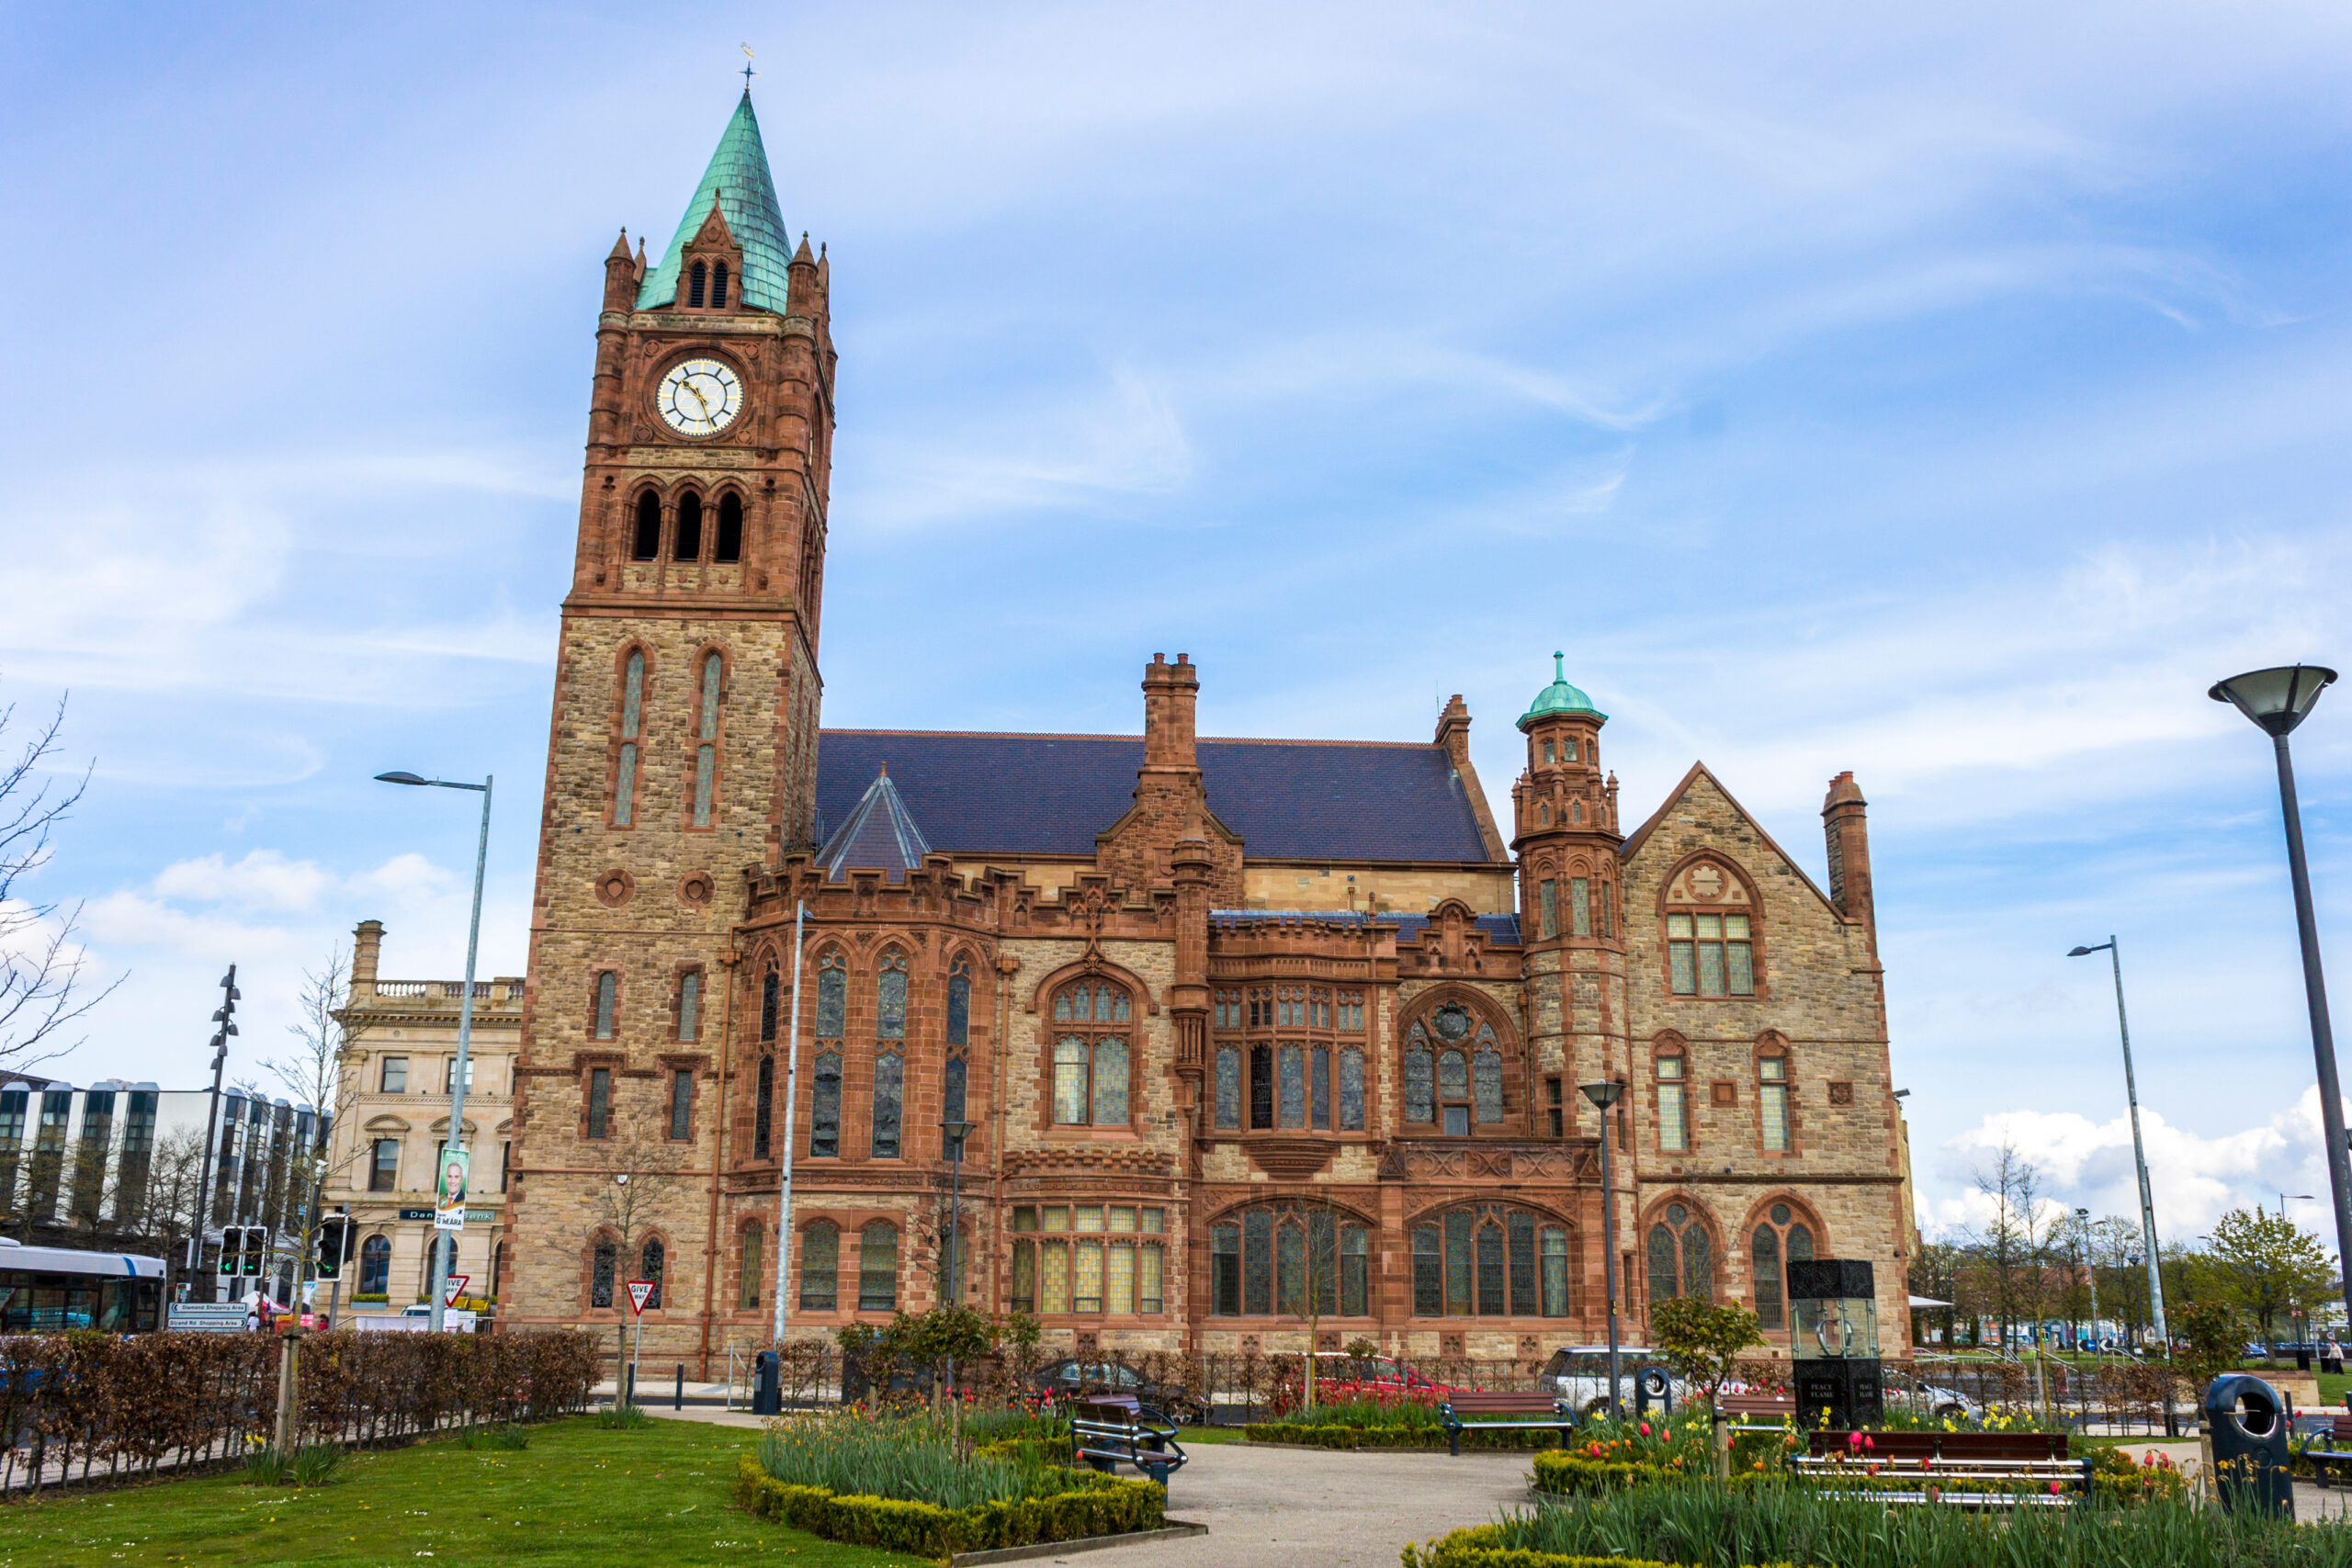 The Guildhall, a building built in 1890 in which the elected members of Derry and Strabane District Council meet. Derry, County Londonderry, Northern Ireland